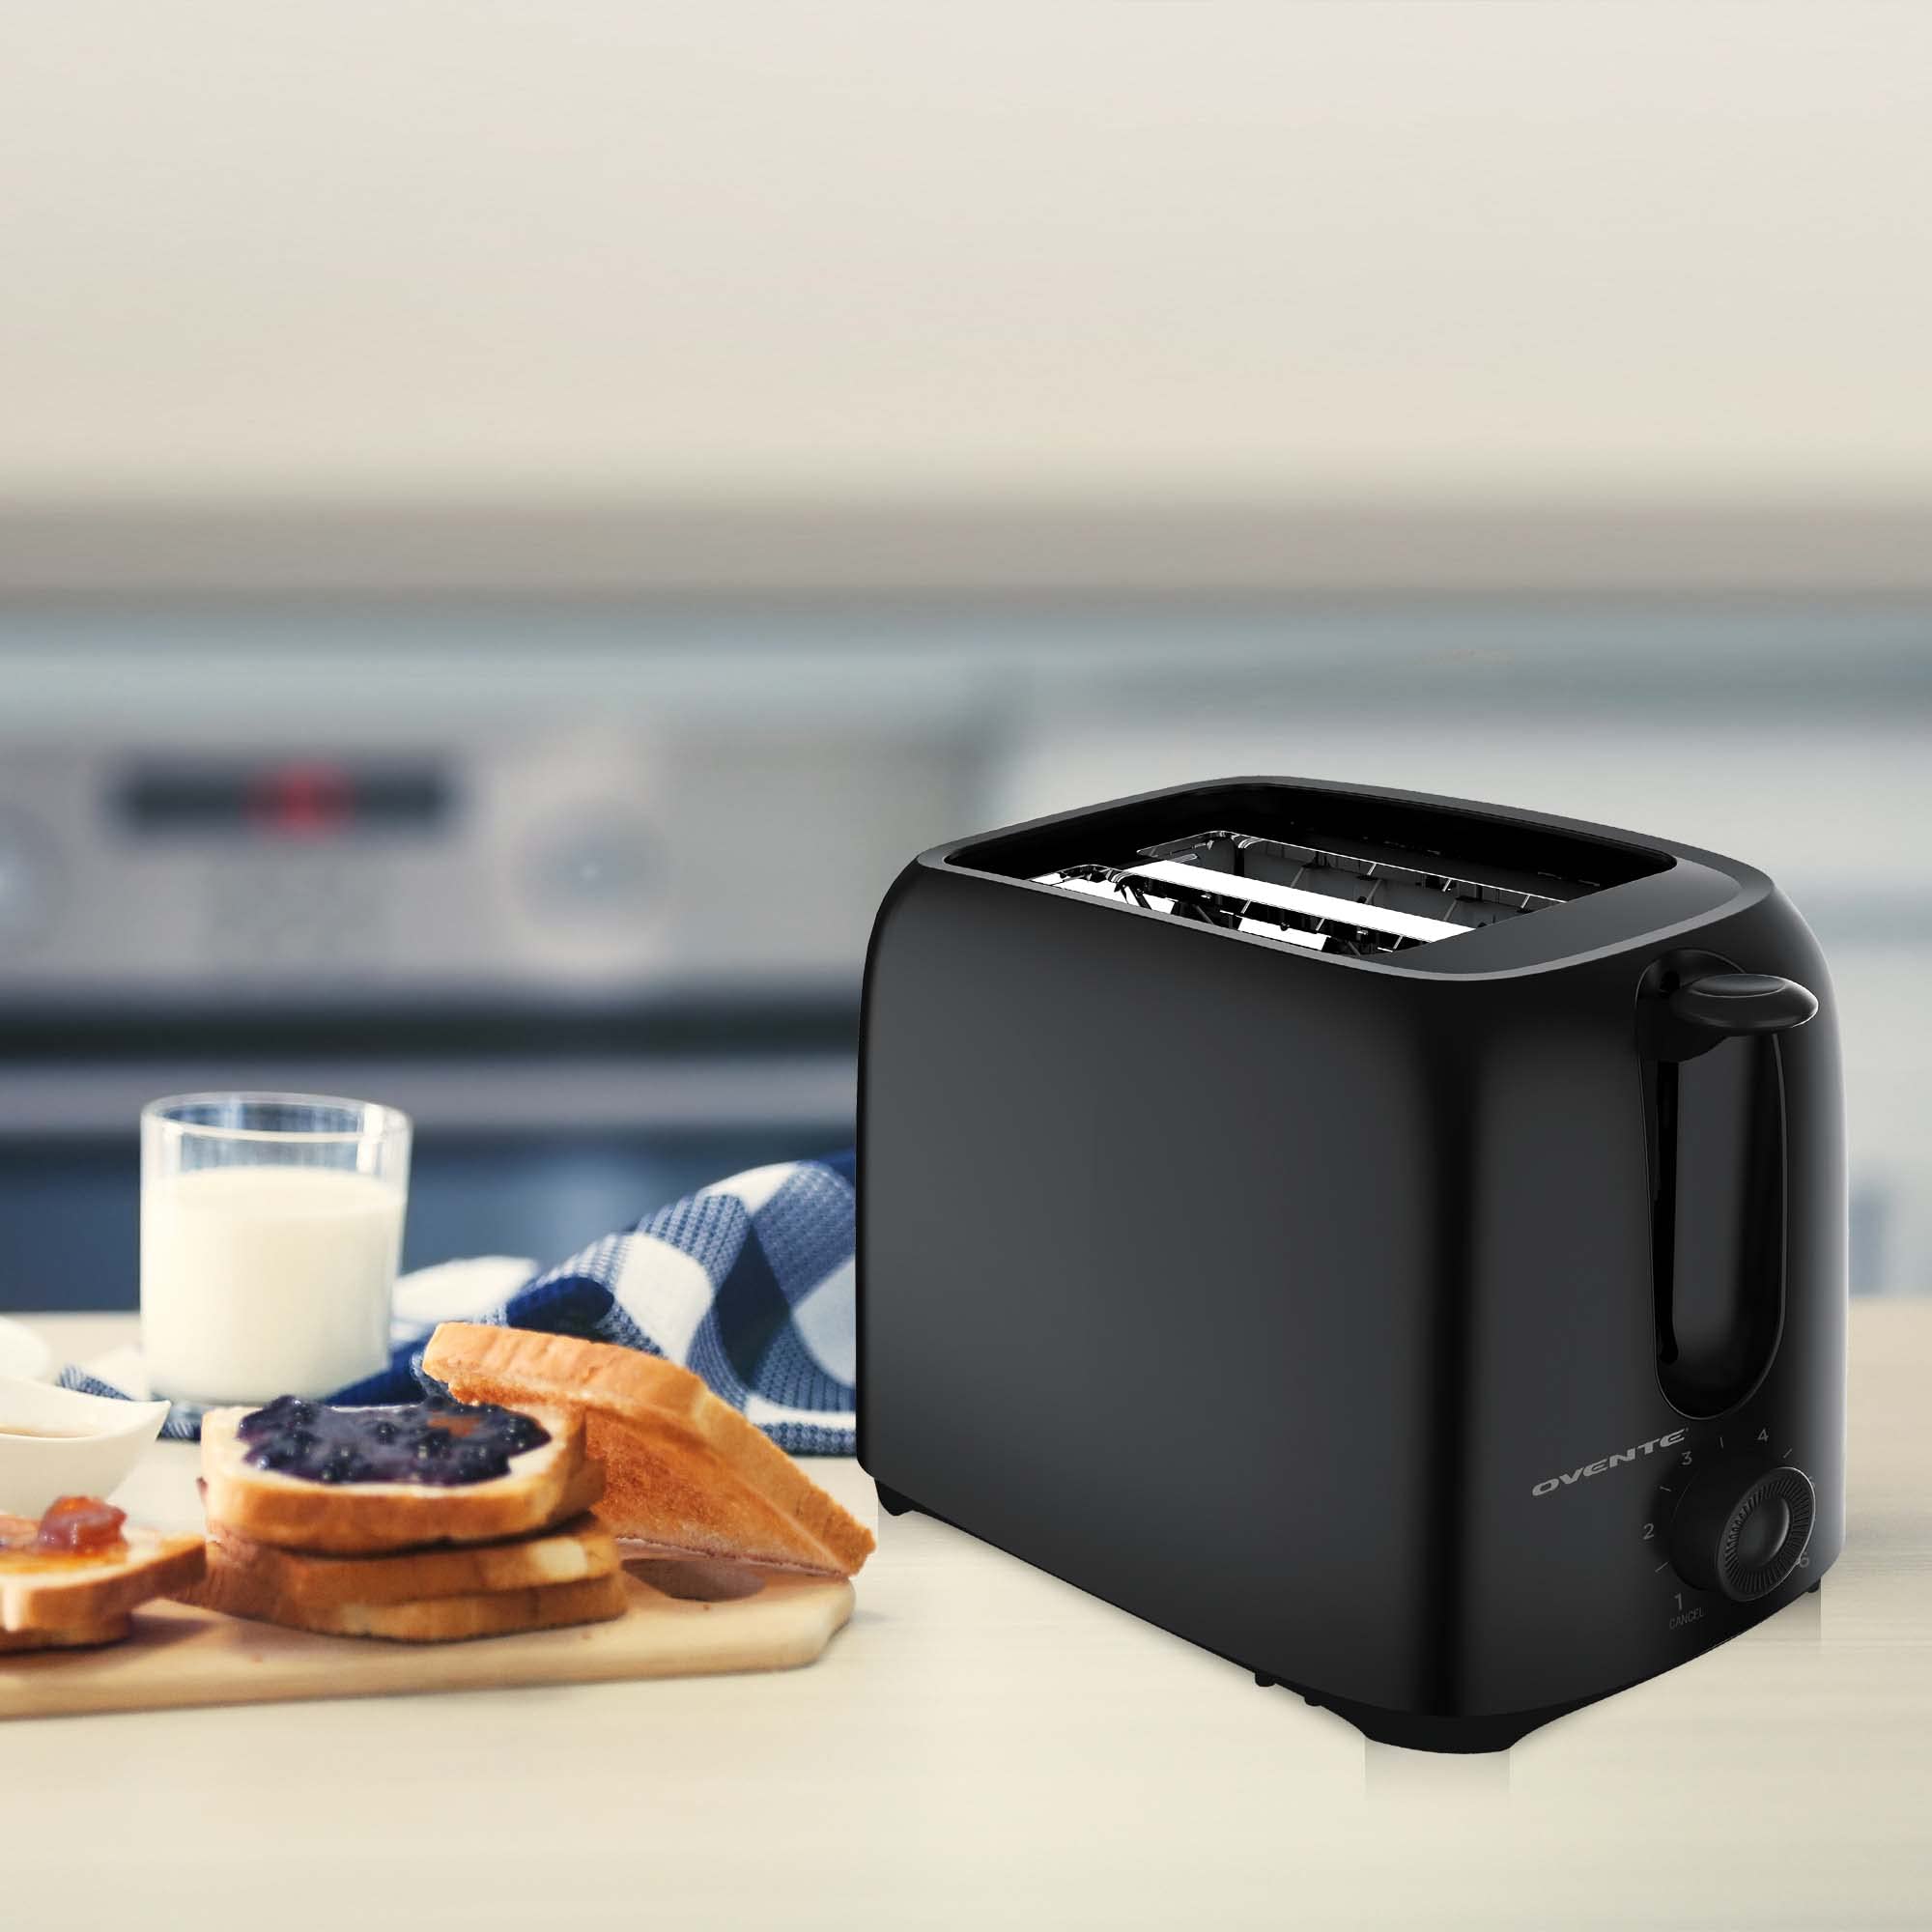 OVENTE Electric 2 Slice Toaster Machine with 6-Shade Toast Settings, 700W Power, Removable Crumb Tray and Compact Design Perfect for Toasting Bread, Bagels, Waffles and Puff Pastry, Black TP2210B